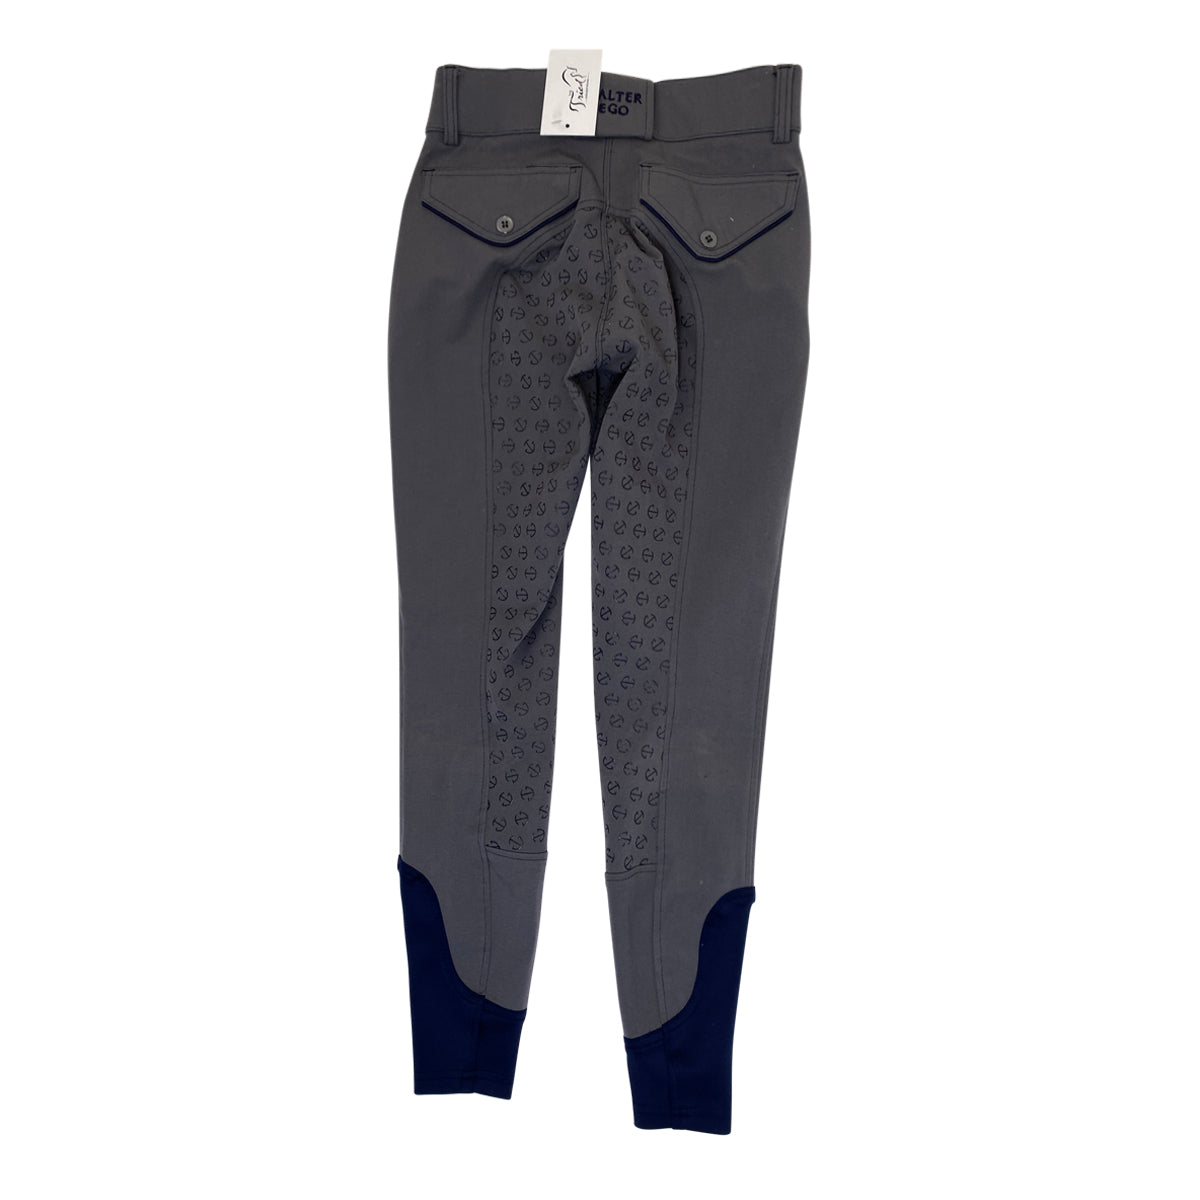 Halter Ego 'Perfection' Full Seat Breeches in Charcoal/Navy